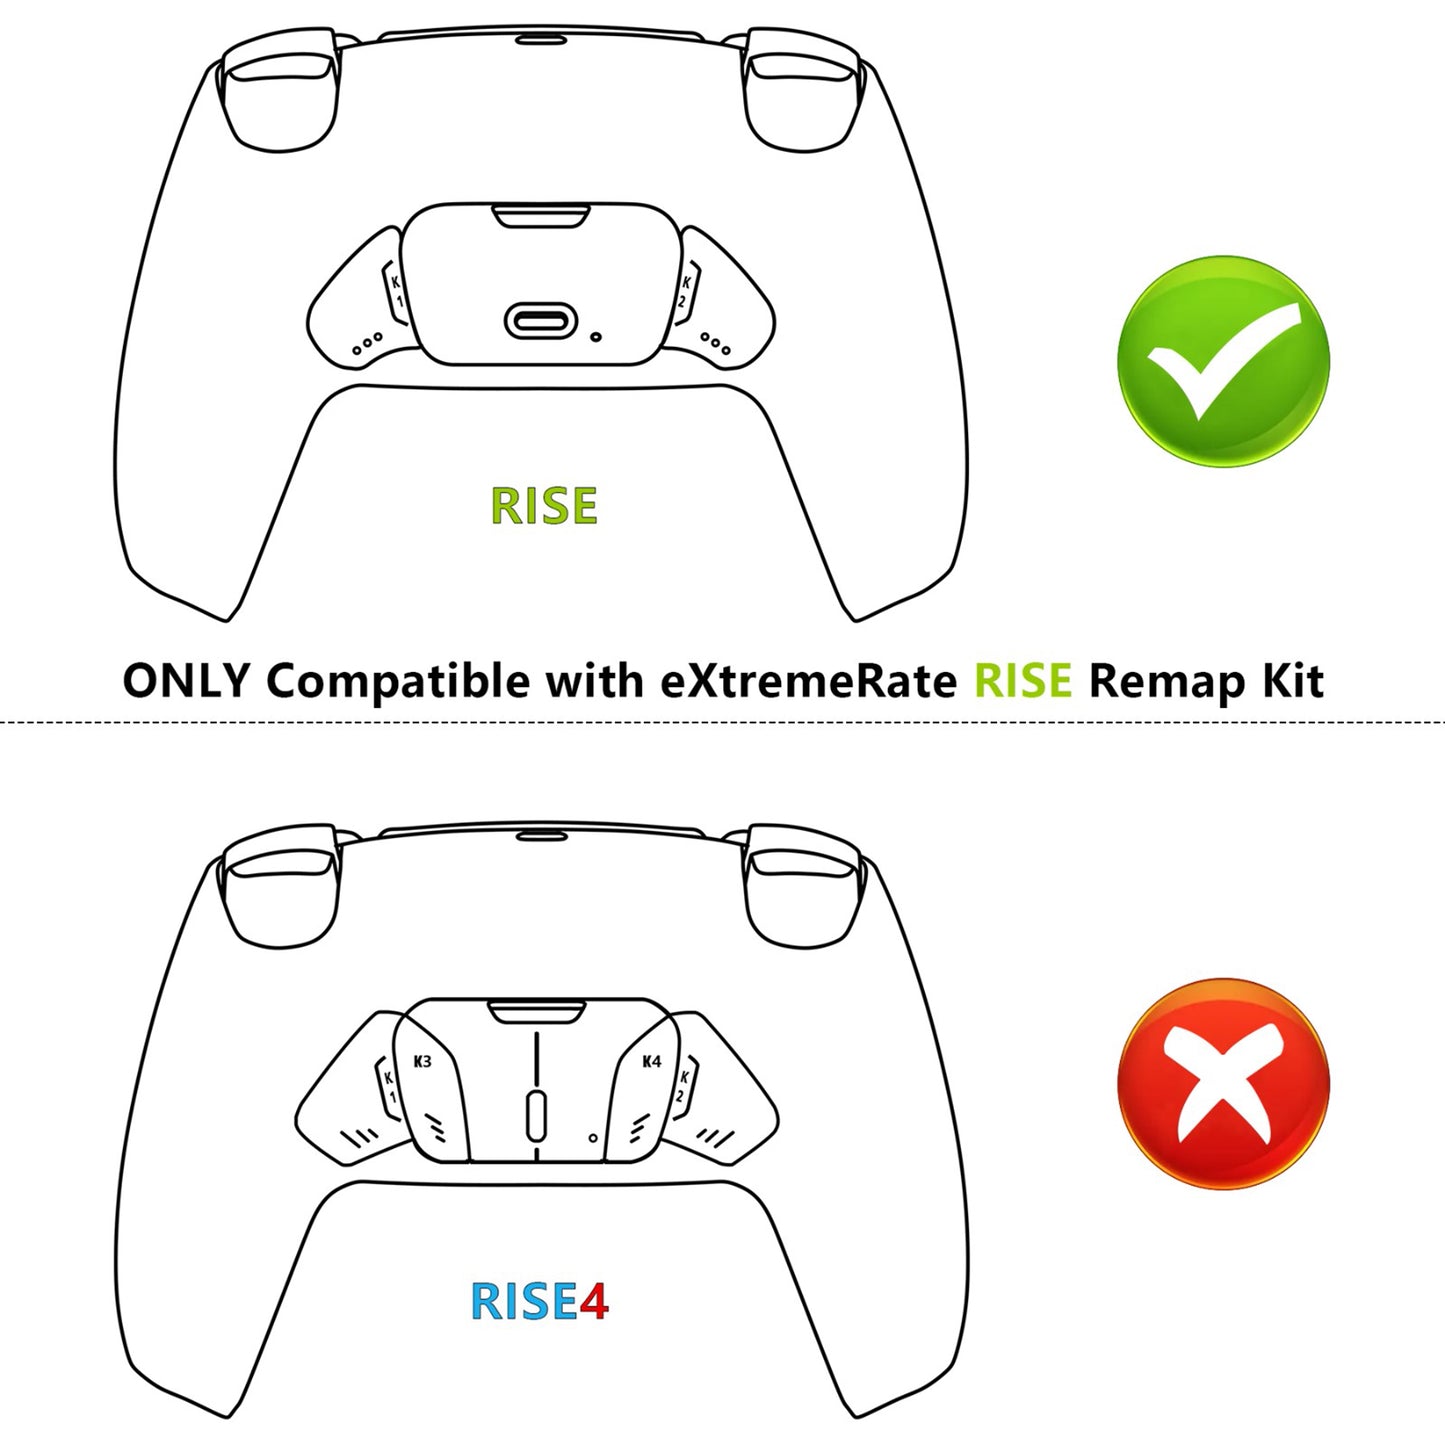 eXtremeRate Replacement Redesigned K1 K2 Back Buttons for eXtremerate RISE Remap Kit, Compatible with PS5 Controller - Starlight Blue eXtremeRate